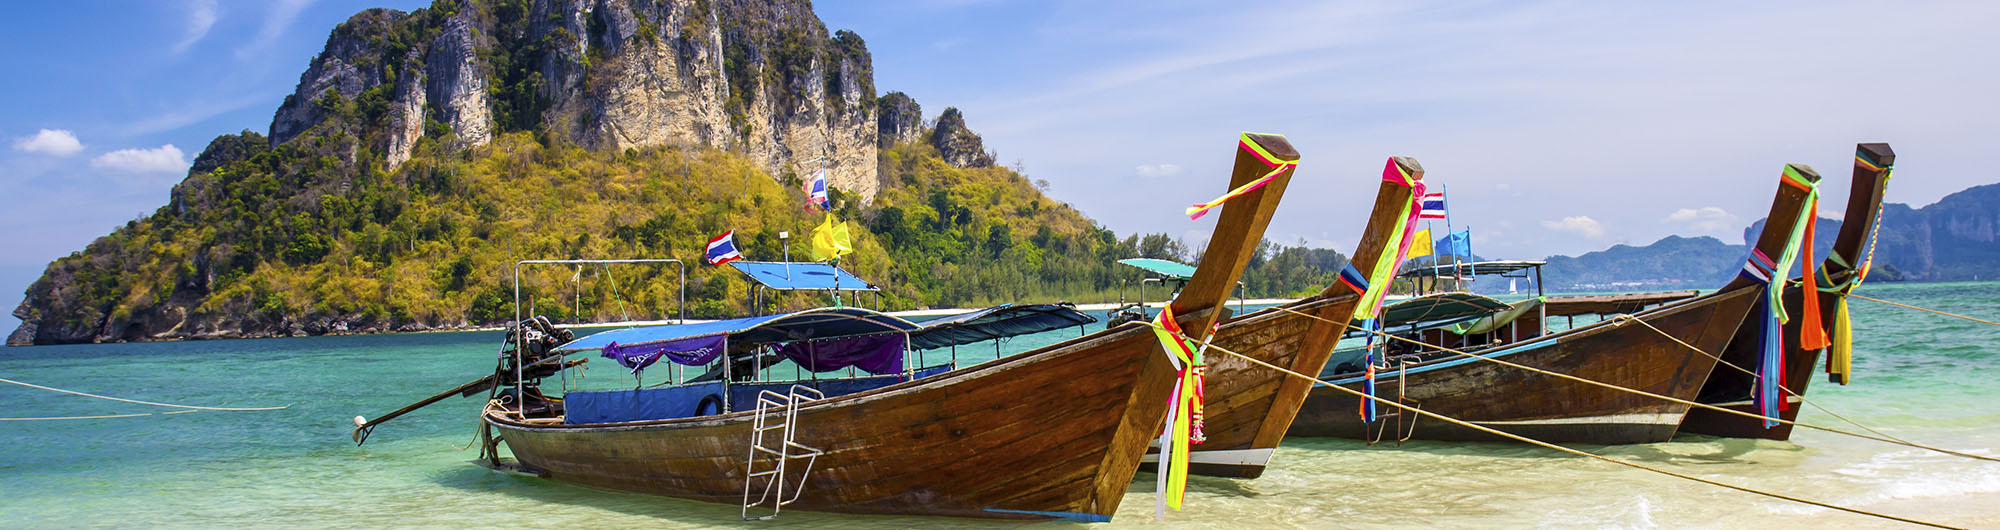 Search and compare cheap flights from Koh Samui Airport to Krabi